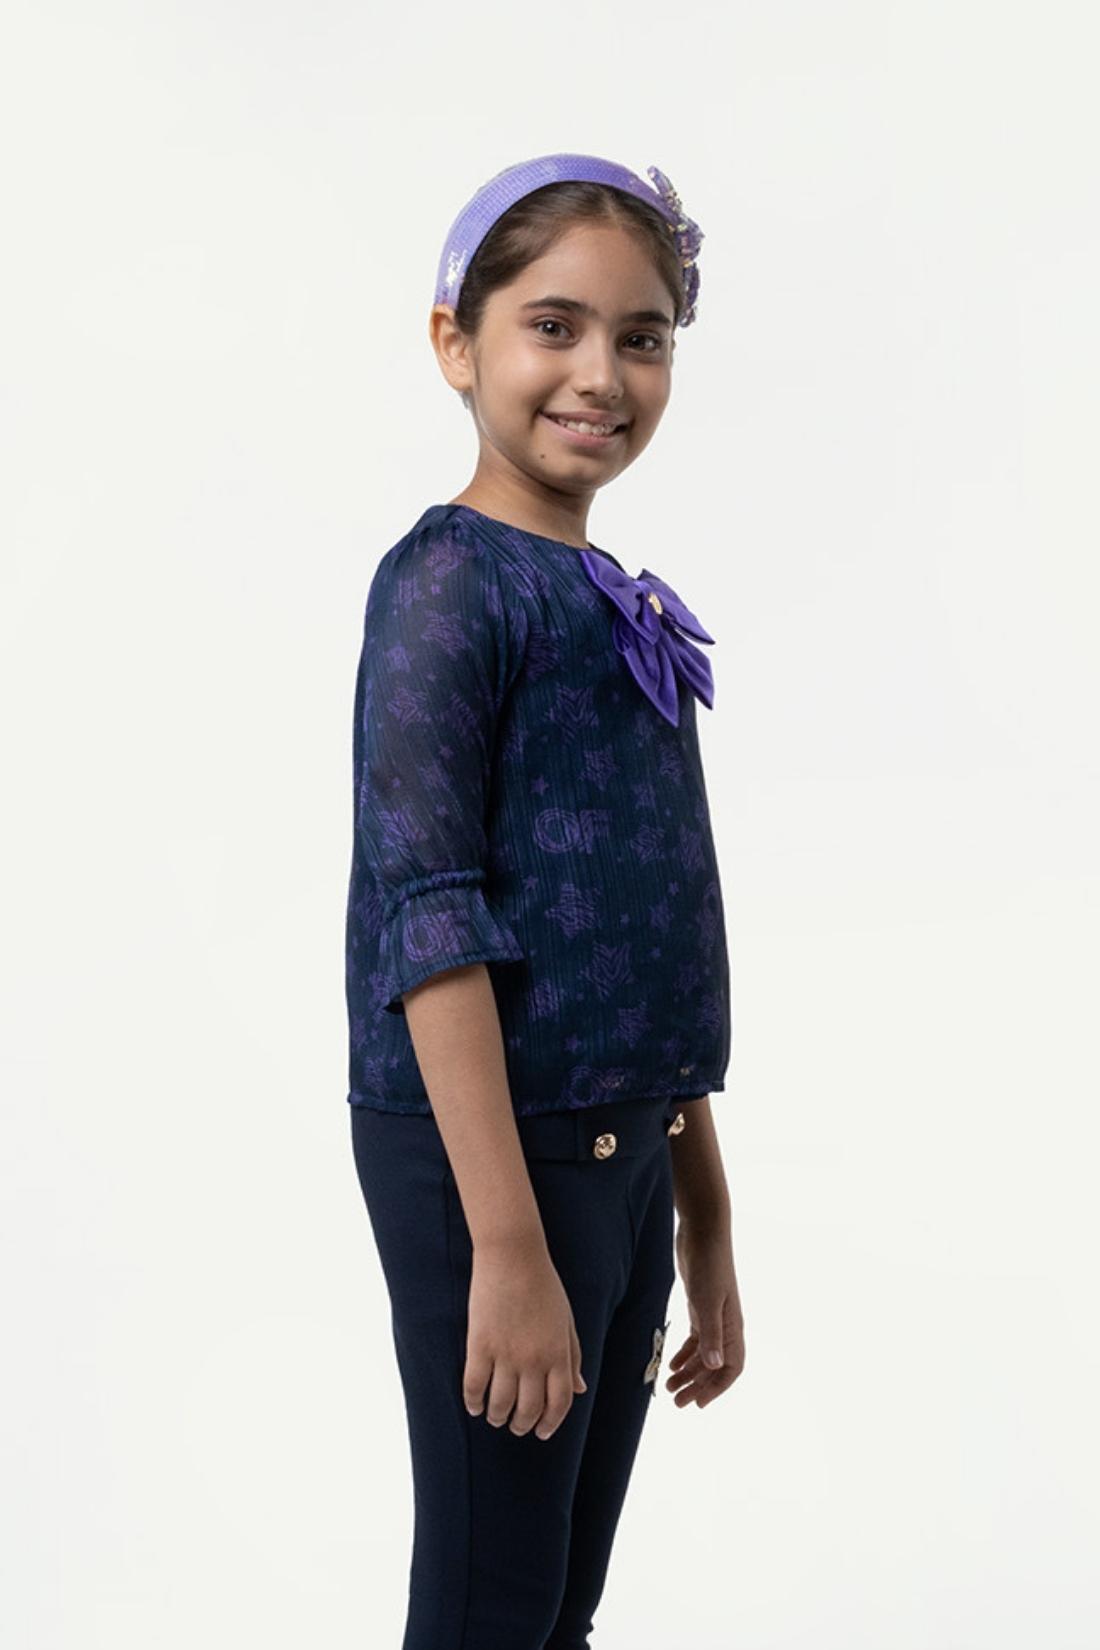 One Friday Kids Girls Navy Blue Star Printed Top With Bow